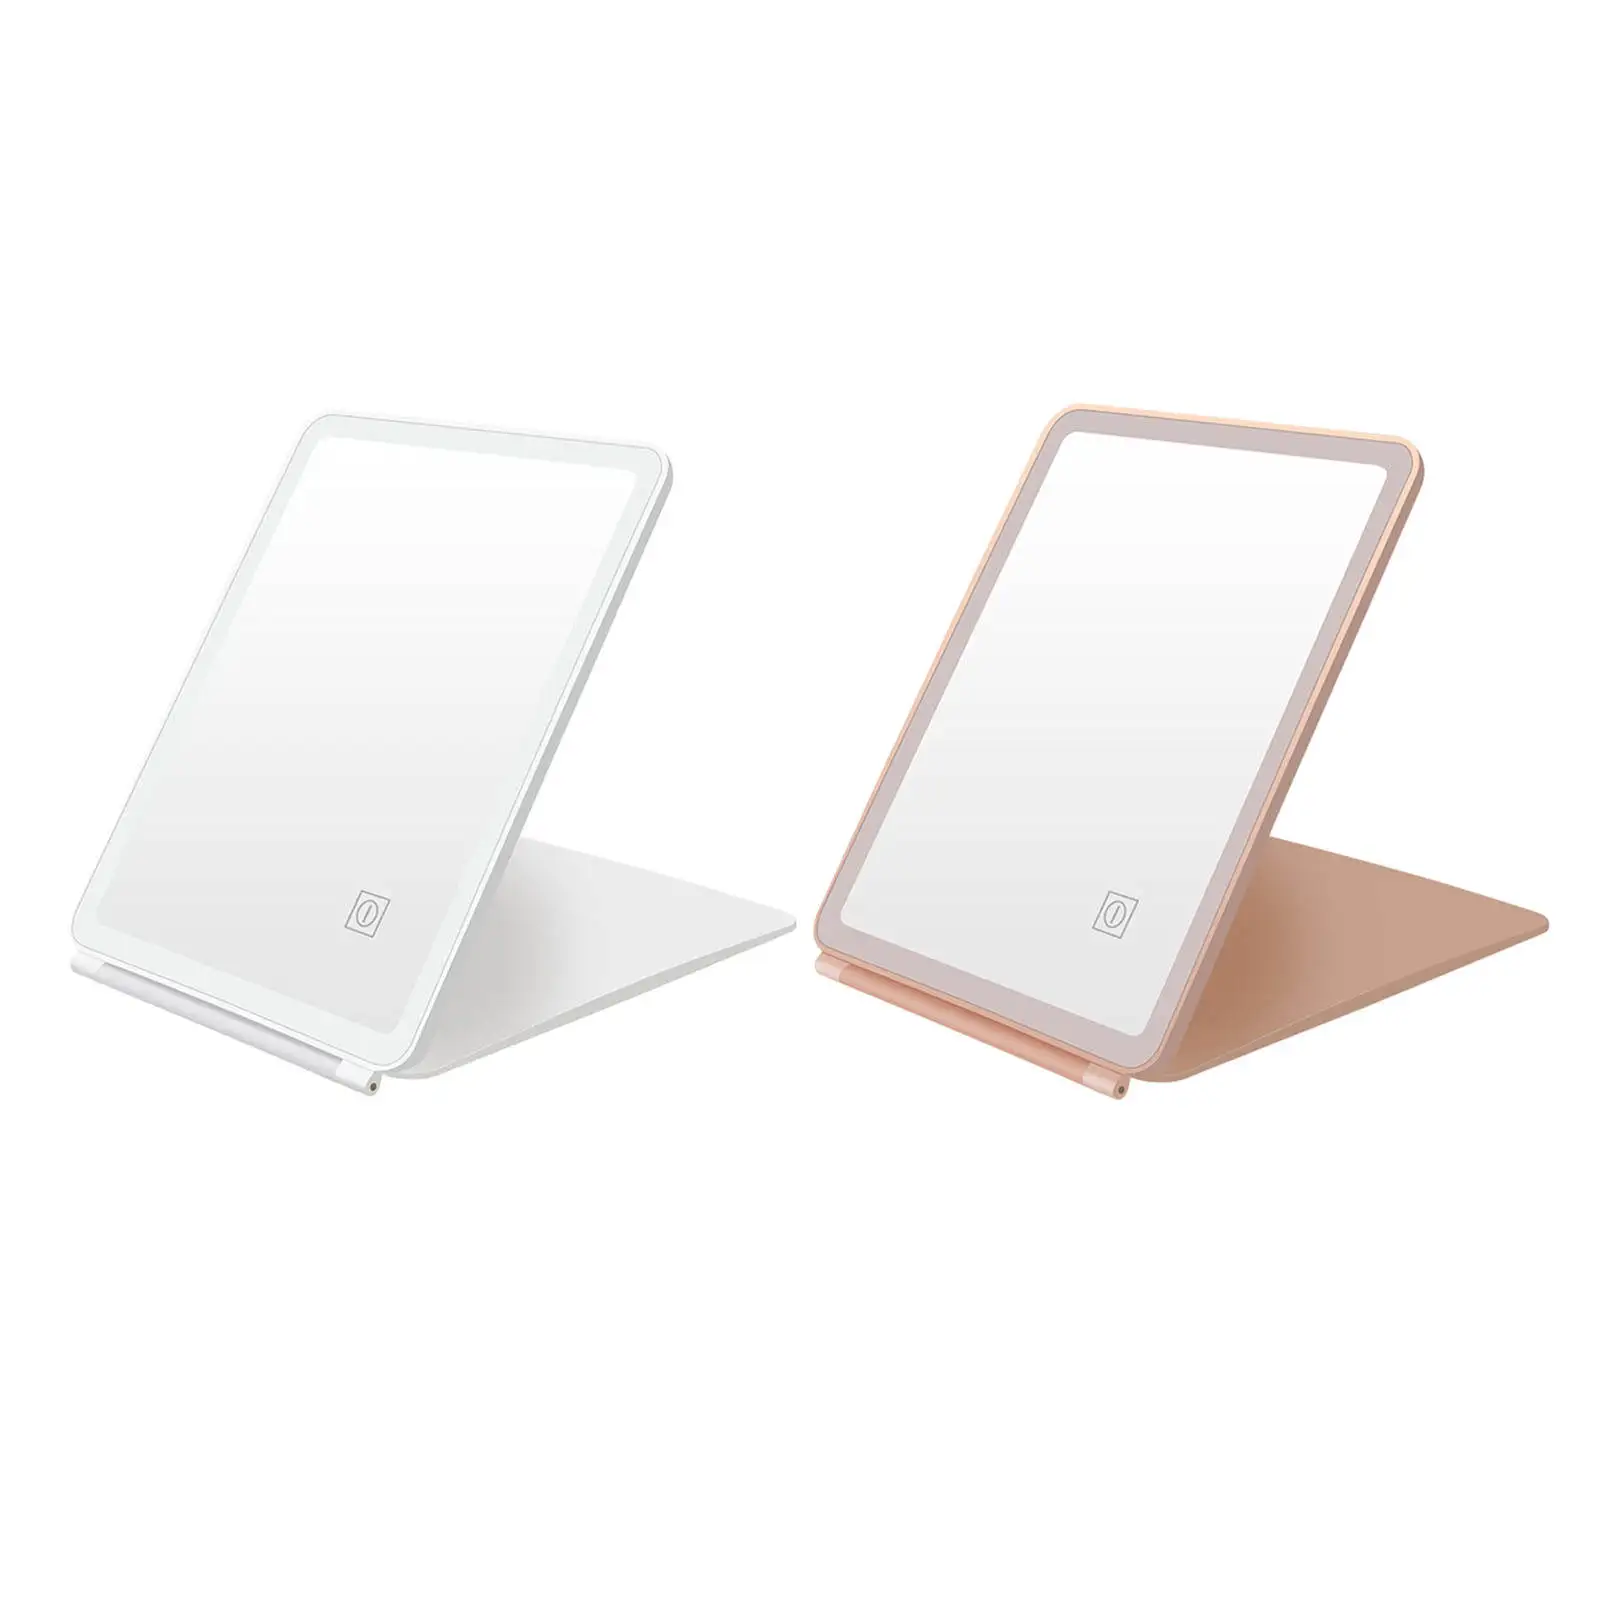 Flip LED Makeup Mirror Touch Screen Dimming Dimmable HD Tabletop Mirror Cosmetic Lighted up Mirror for Home Beauty Travel Makeup